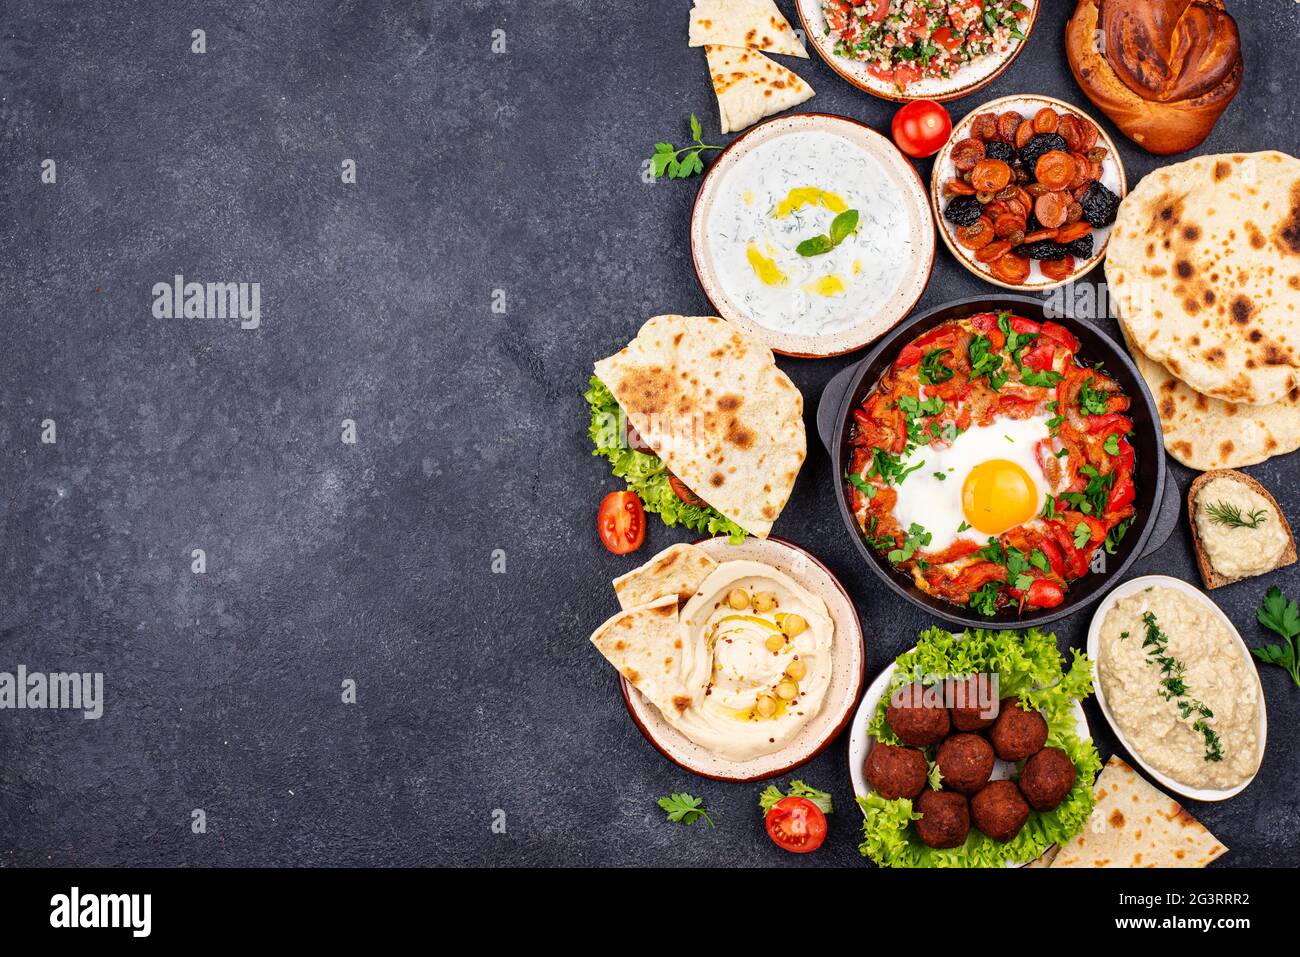 Traditional Jewish, Israeli and middle Eastern food Stock Photo